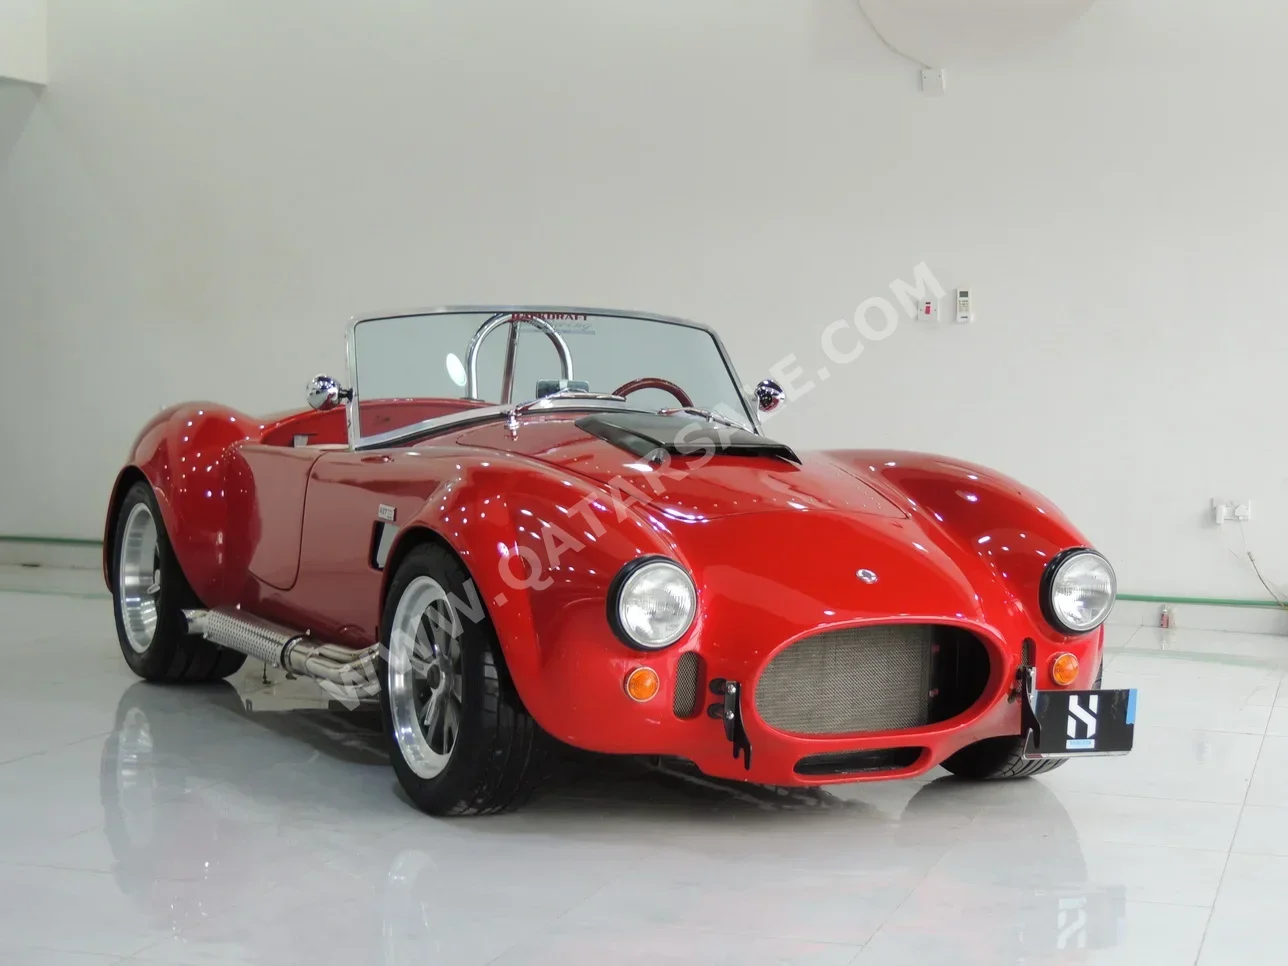 Ford  Cobra  Shelby  1965  Manual  8,000 Km  8 Cylinder  Rear Wheel Drive (RWD)  Convertible  Red